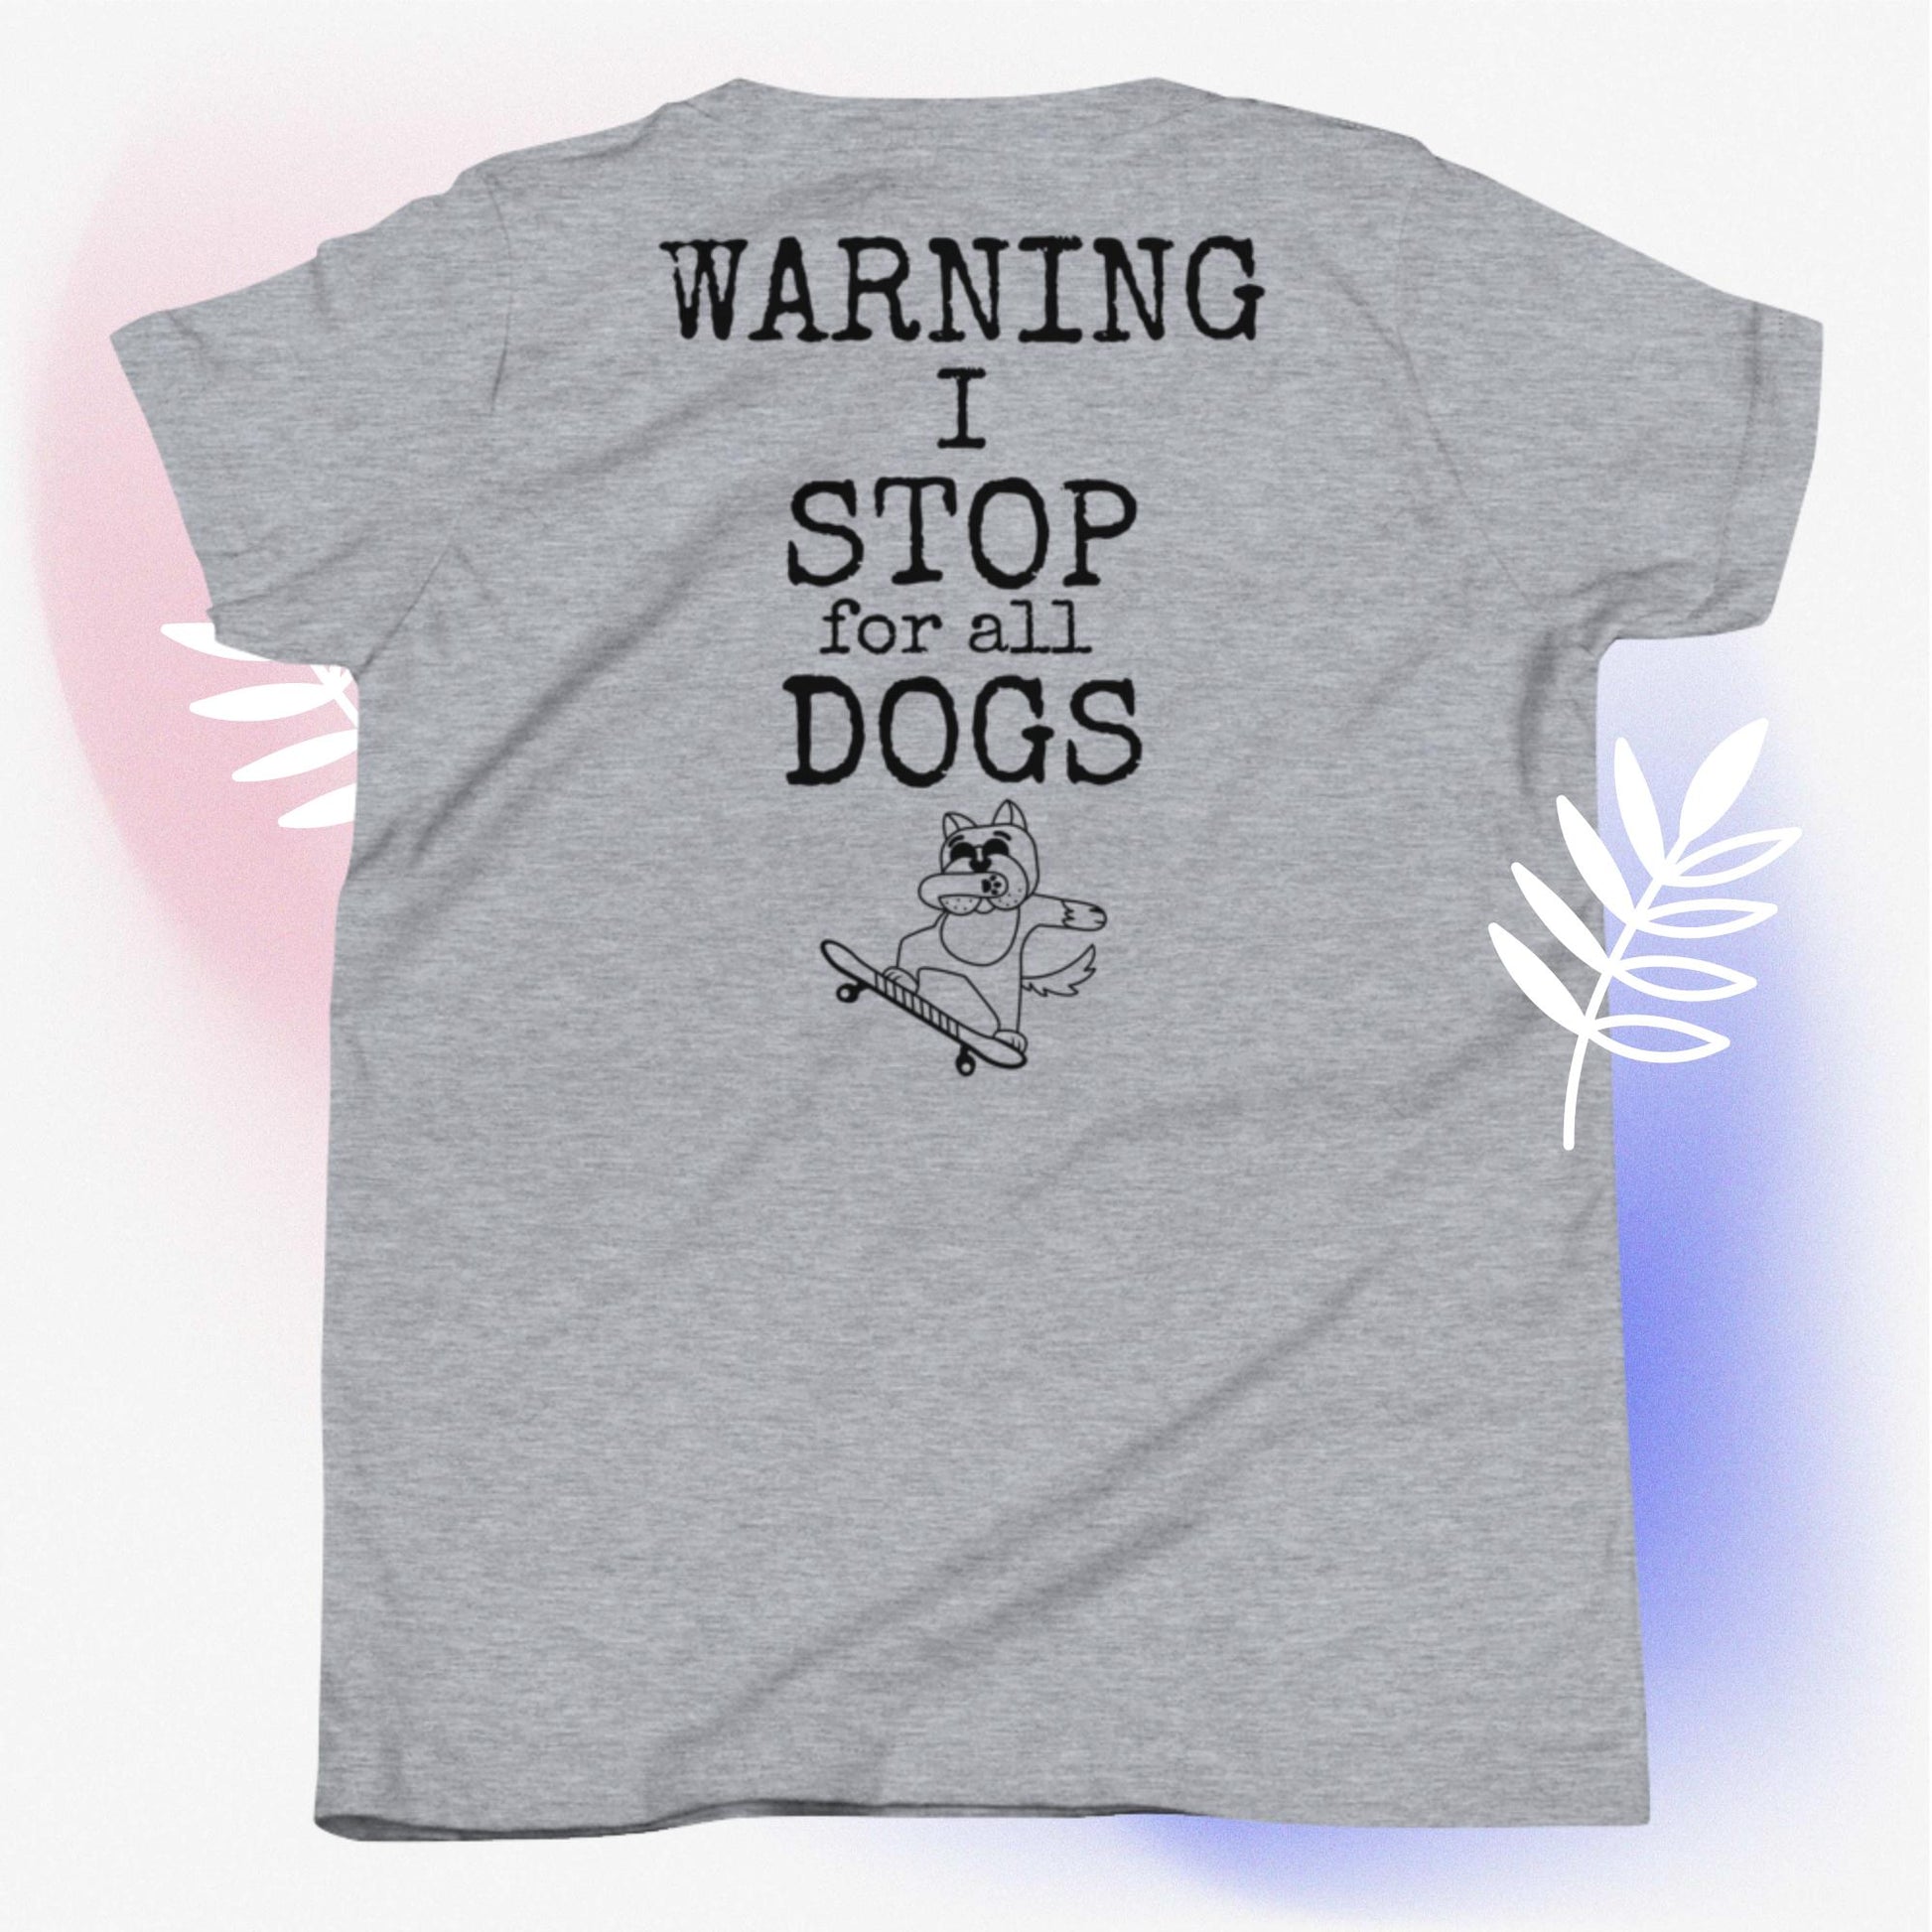 Dog Lover, Warning I Stop for All Dogs Tee - On the Go with Princess O